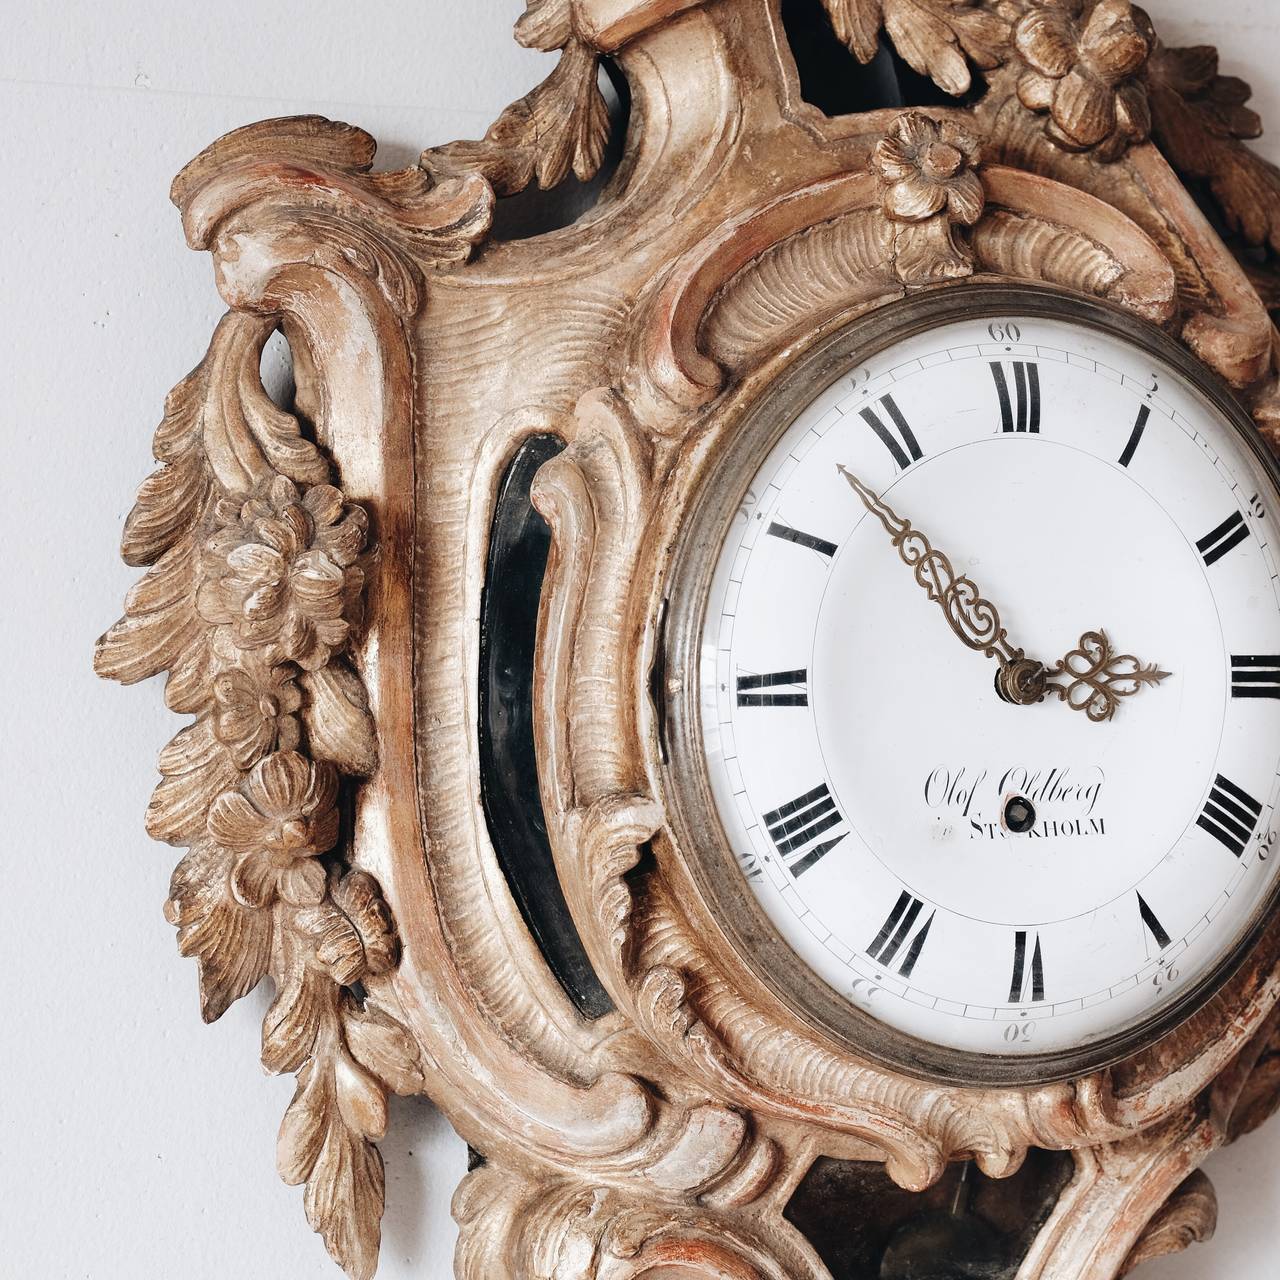 A fine Swedish 18th century richly carved and decorated Rococo giltwood wall clock. Stockholm, circa 1770. 

Condition: Excellent.
Wear: Wear consistent with age and use.
Finish: Gilded wood.
Hardware: Original.
Year: circa 1770.